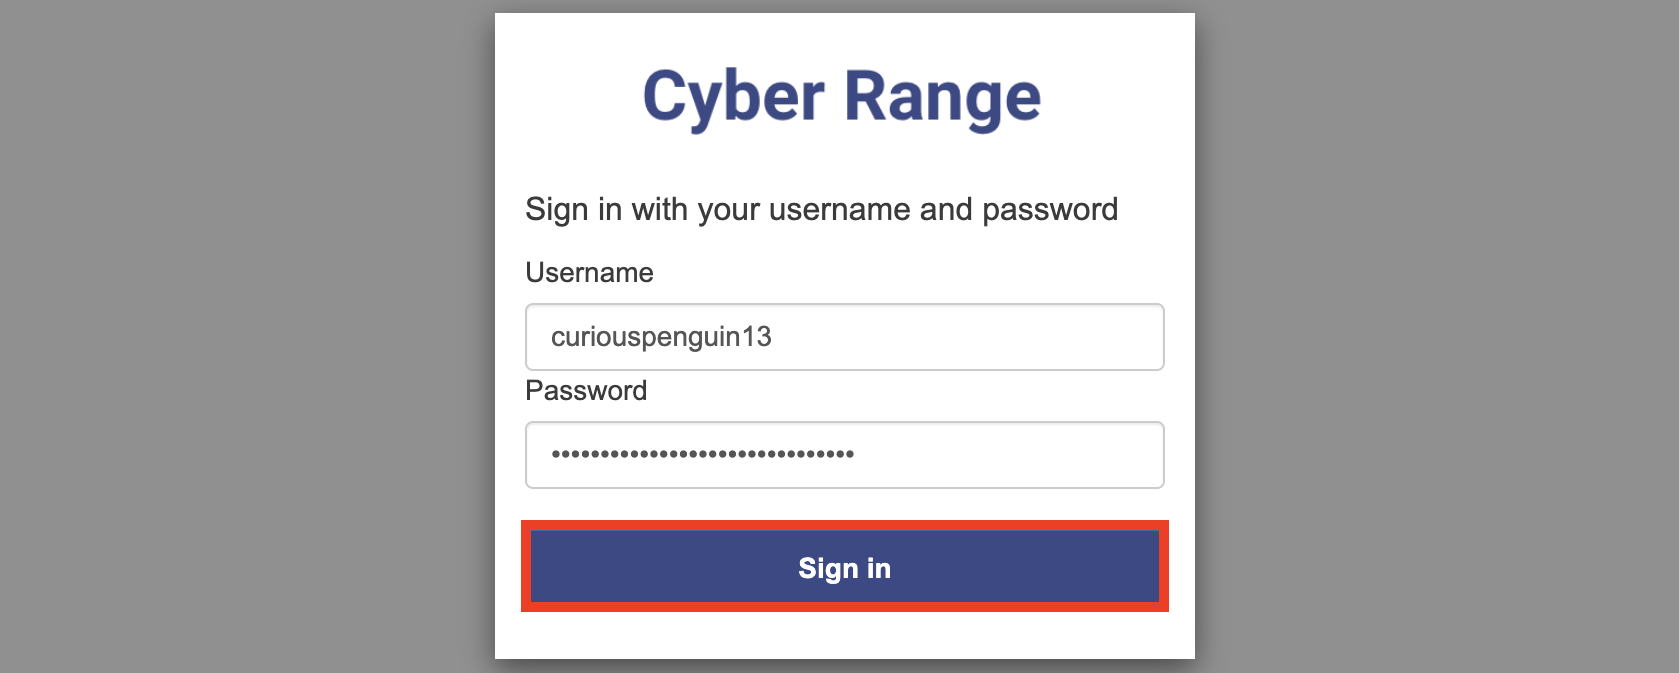 In descending order, there is a username entry field, a password entry field, and then a "Sign in" button.